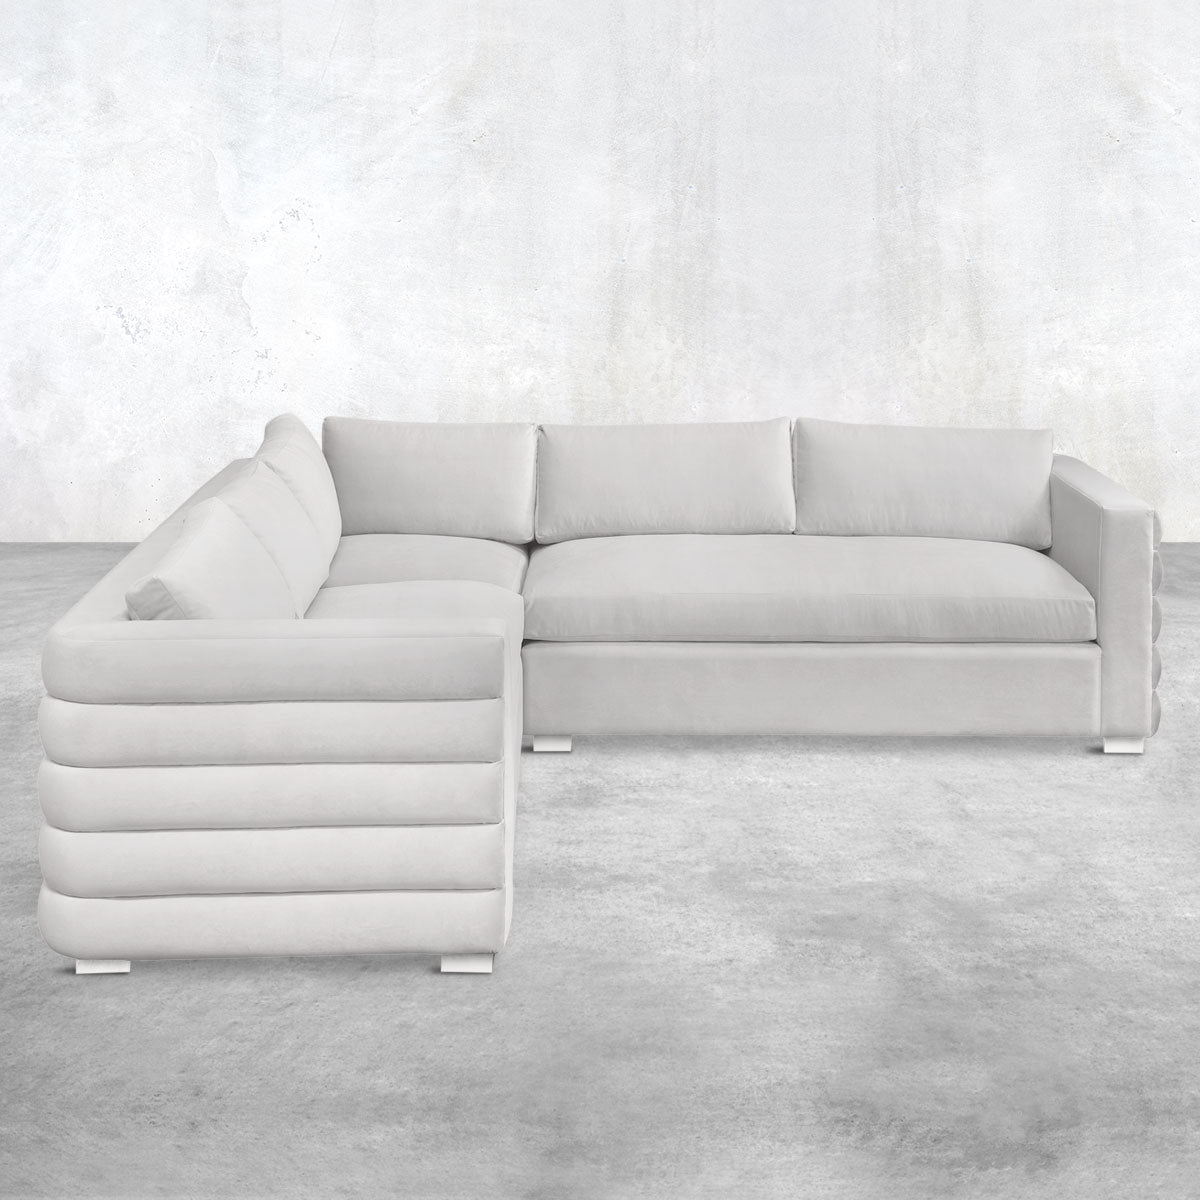 Light gray L-shaped three-piece sectional with pin feet, a pillow back, straight arms and horizontal channel-tufted upholstery on the outside.